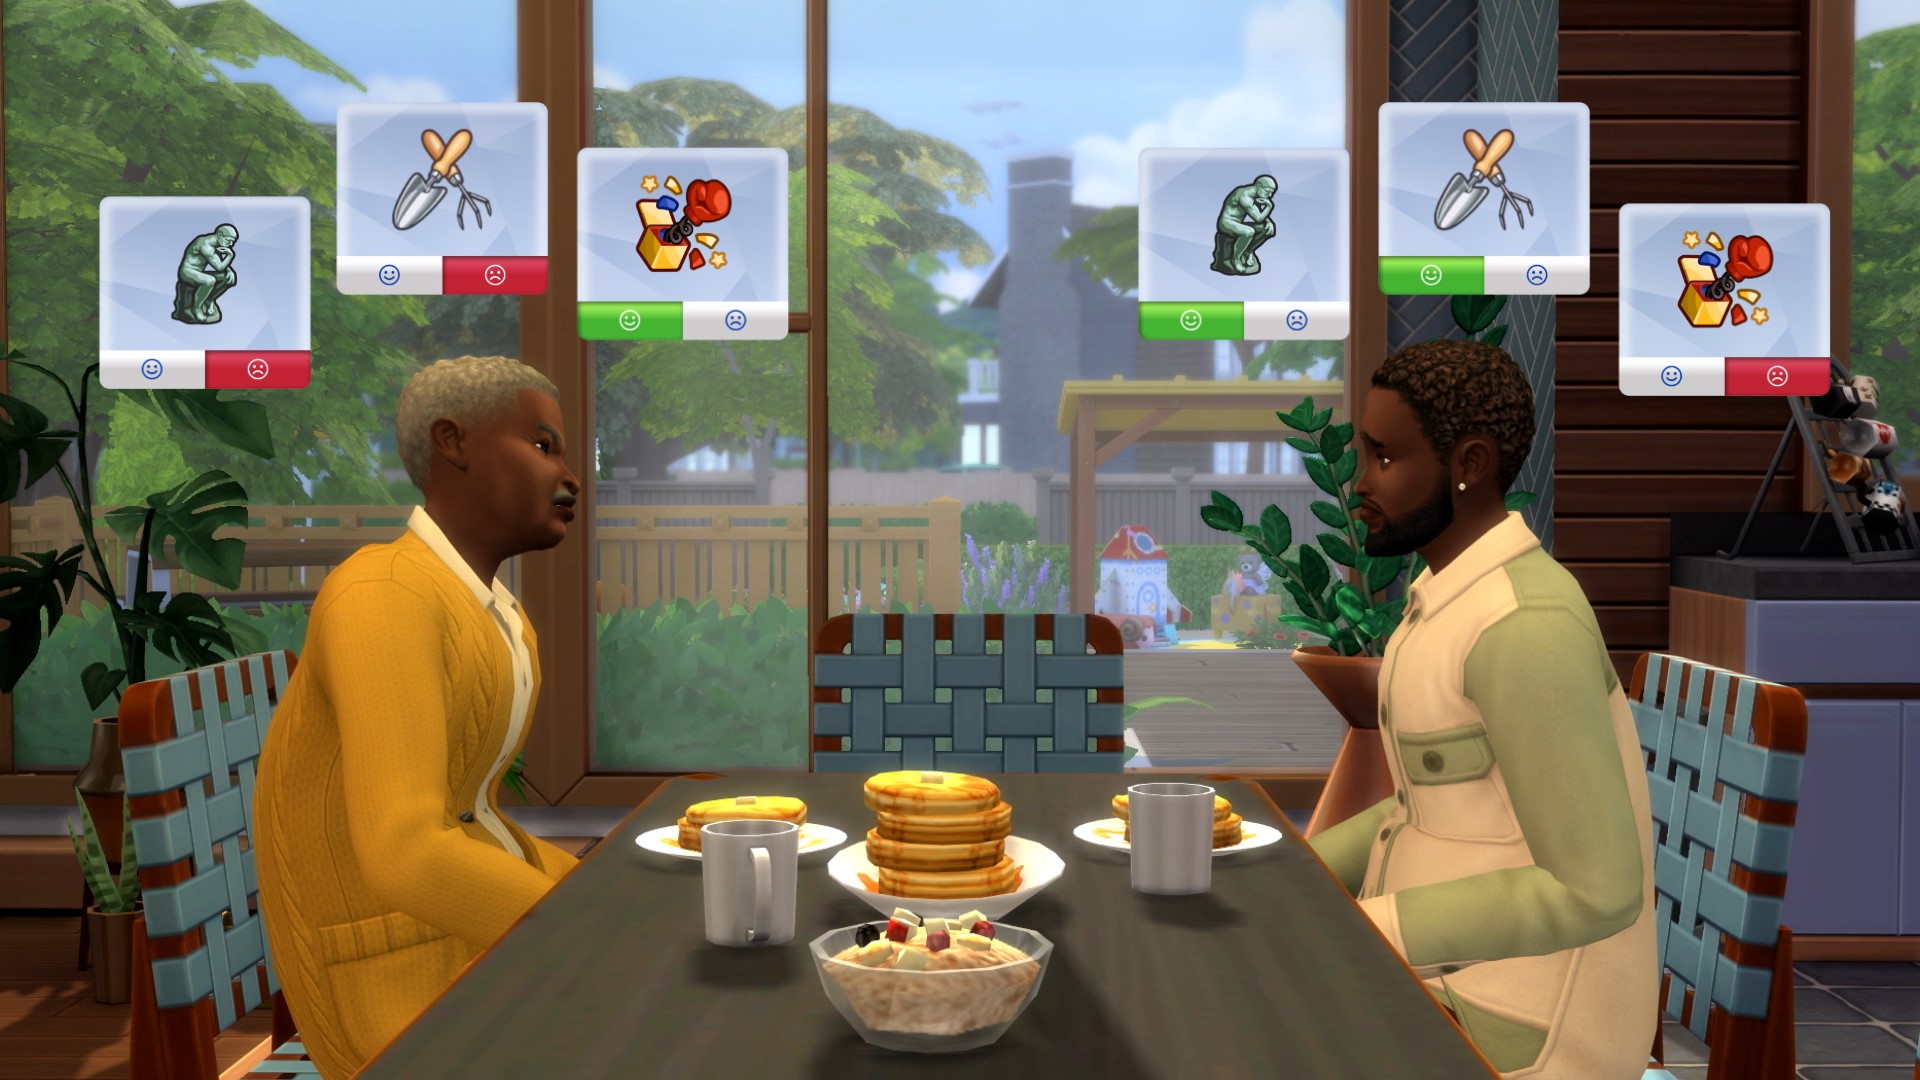 An elder Sim and an adult Sim sit across a dining table from each other. They have different likes and dislikes displayed above their head.